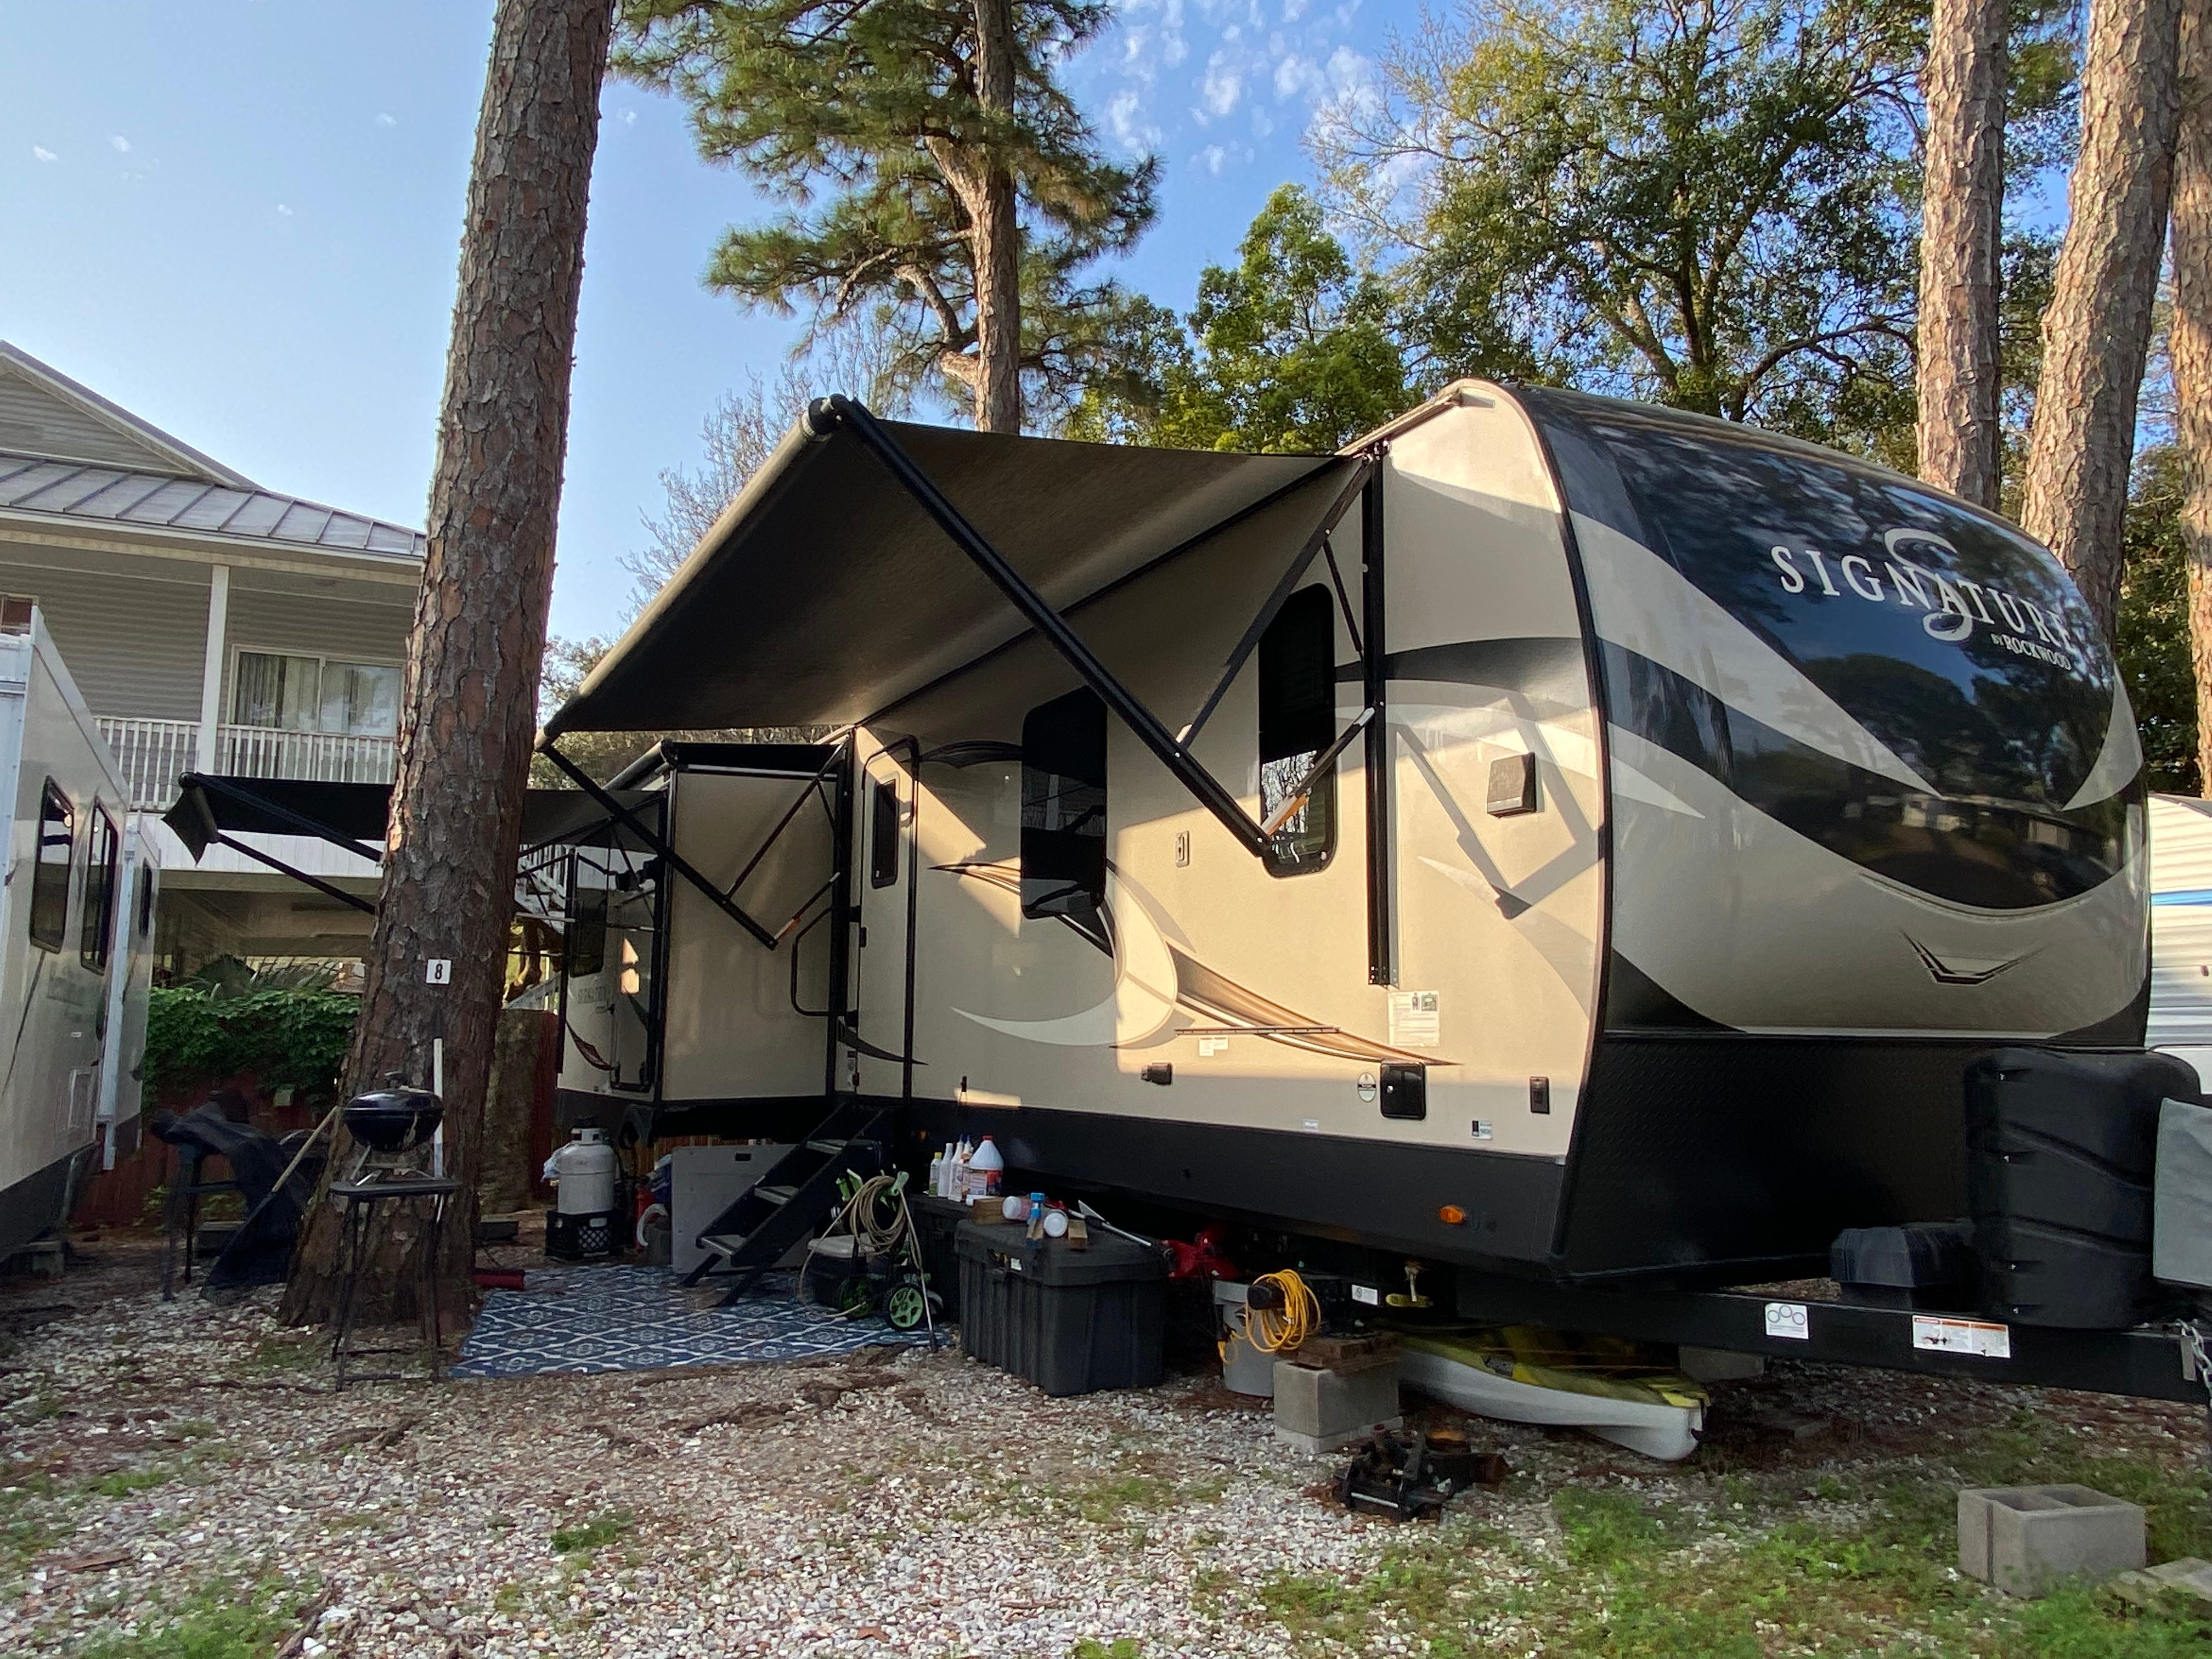 Camper submitted image from BAYVIEW RV CAMPGROUND - Closed for 2020 season - 1